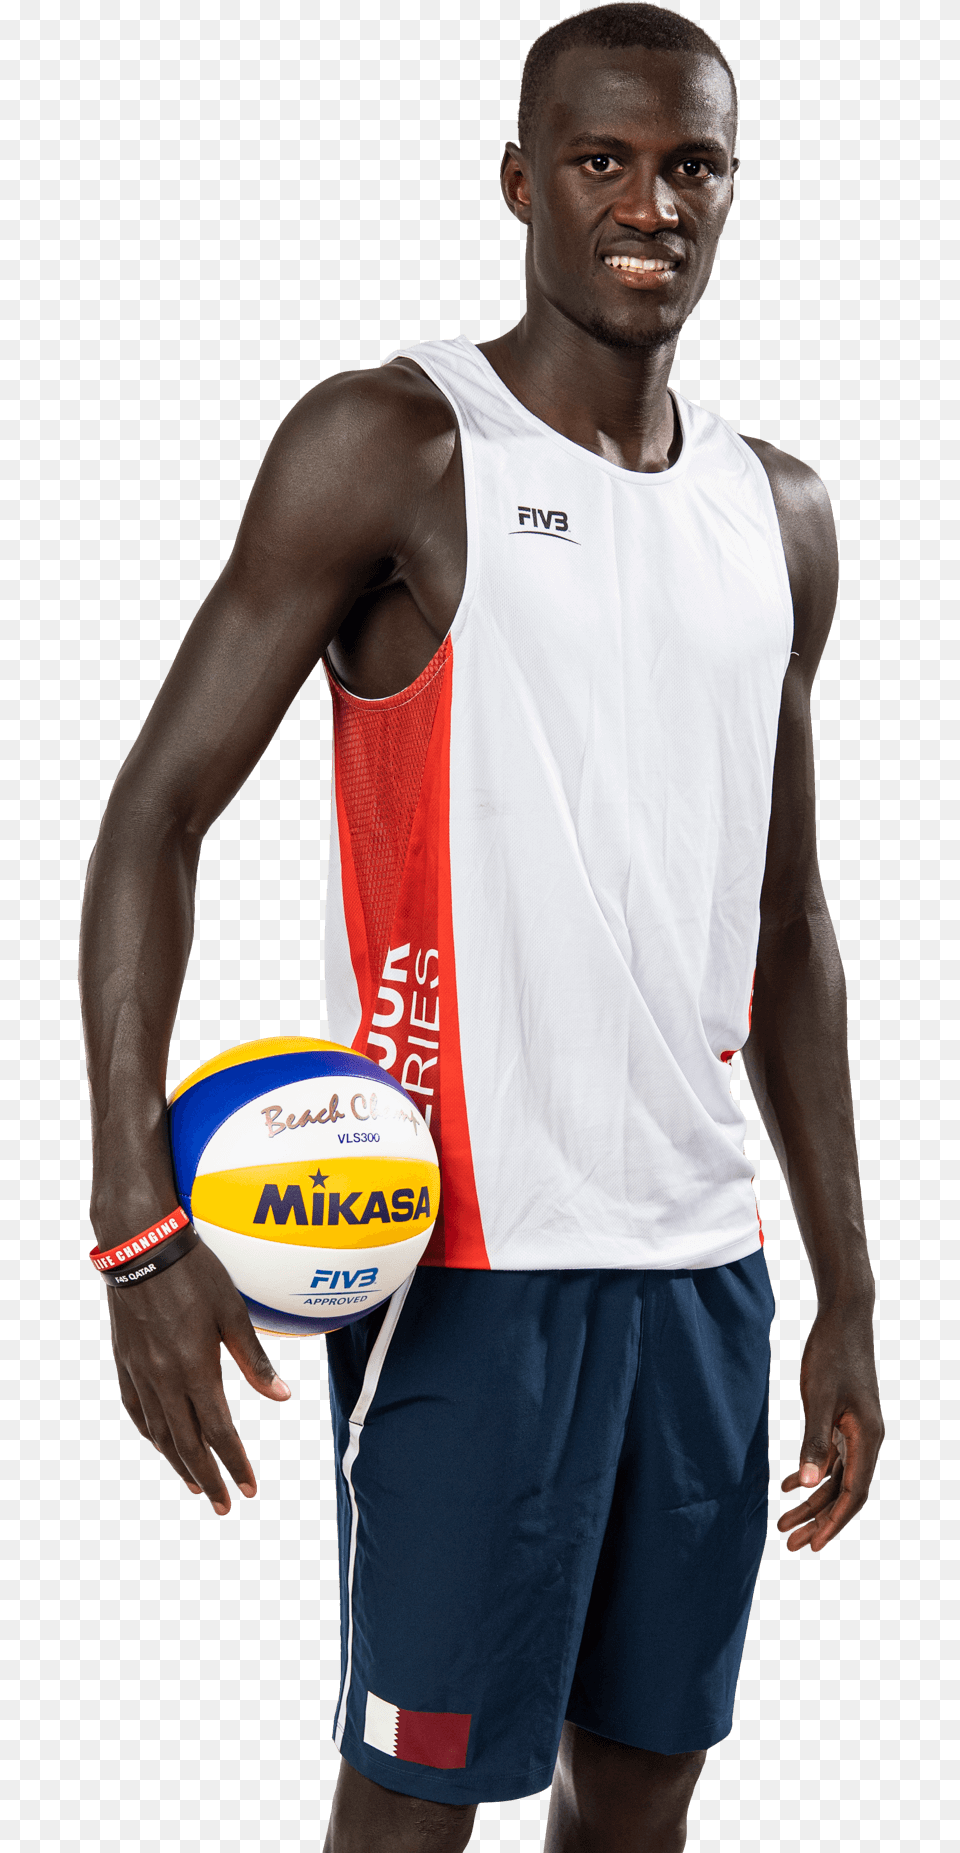 Beach Volleyball Major Series Volleyball Player, Volleyball (ball), Ball, Clothing, Sport Free Transparent Png